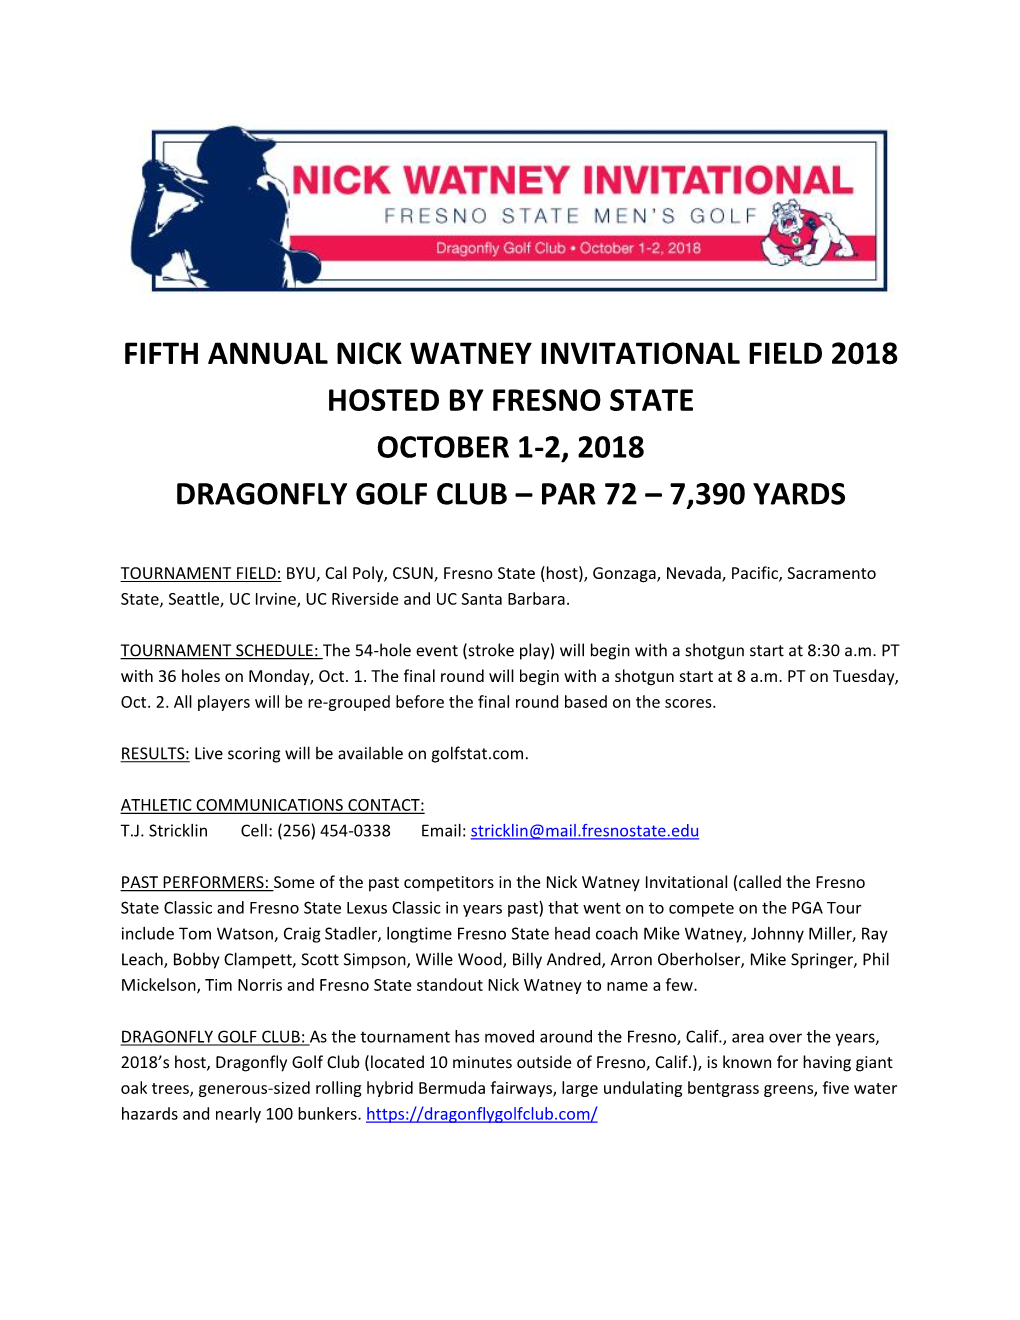 Fifth Annual Nick Watney Invitational Field 2018 Hosted by Fresno State October 1-2, 2018 Dragonfly Golf Club – Par 72 – 7,390 Yards